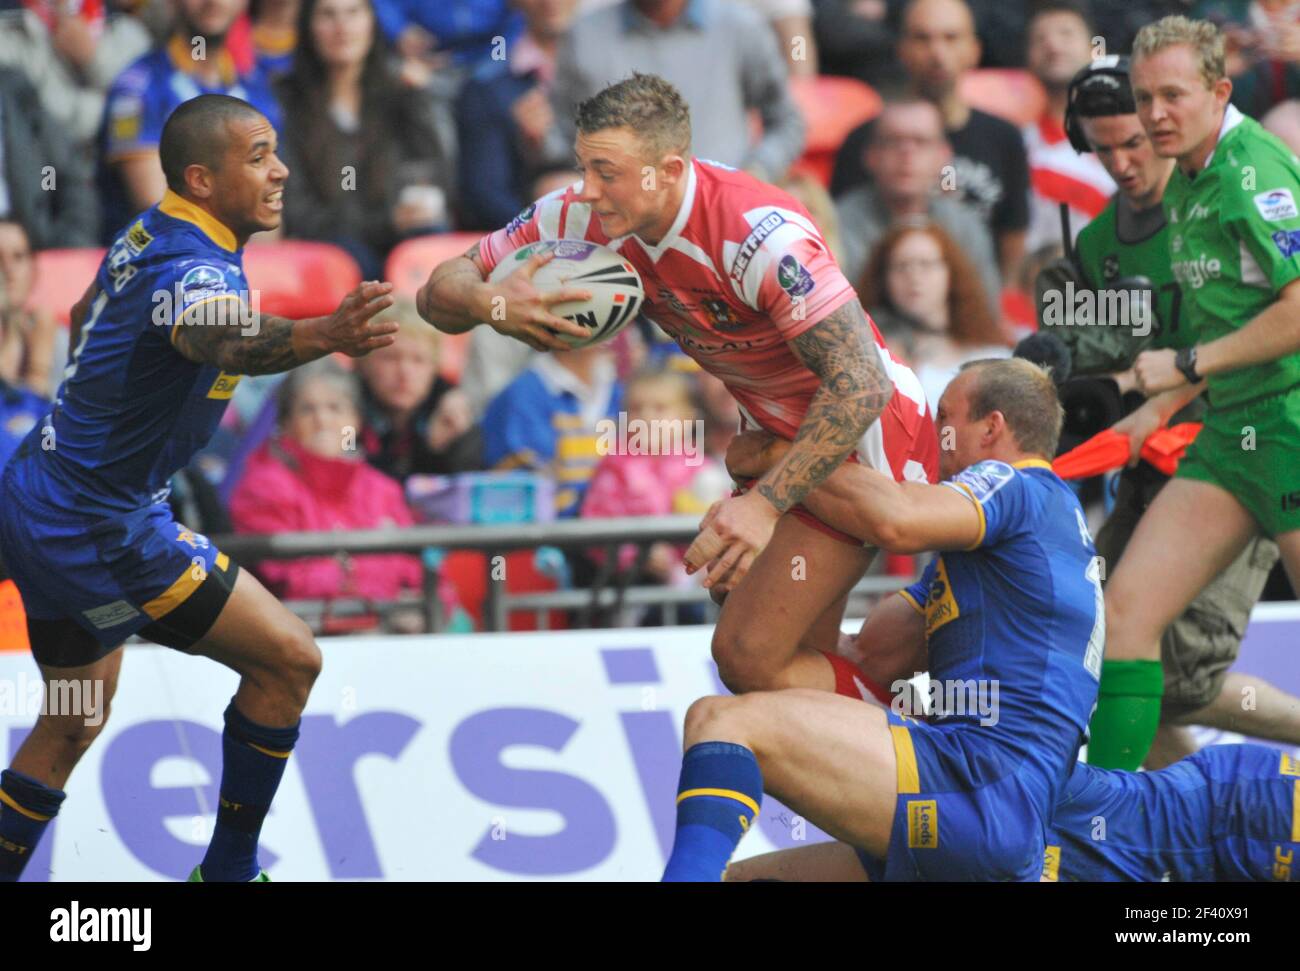 RUGBY LEAGUE. CARNEGIE CHALLENGE CUP FINAL AT WEMBLEY. LEEDS V WIGAN..JOSH CHARNLEY ABOUT TO SCORE THE 1ST TRY.  27/8/2011. PICTURE DAVID ASHDOWN Stock Photo